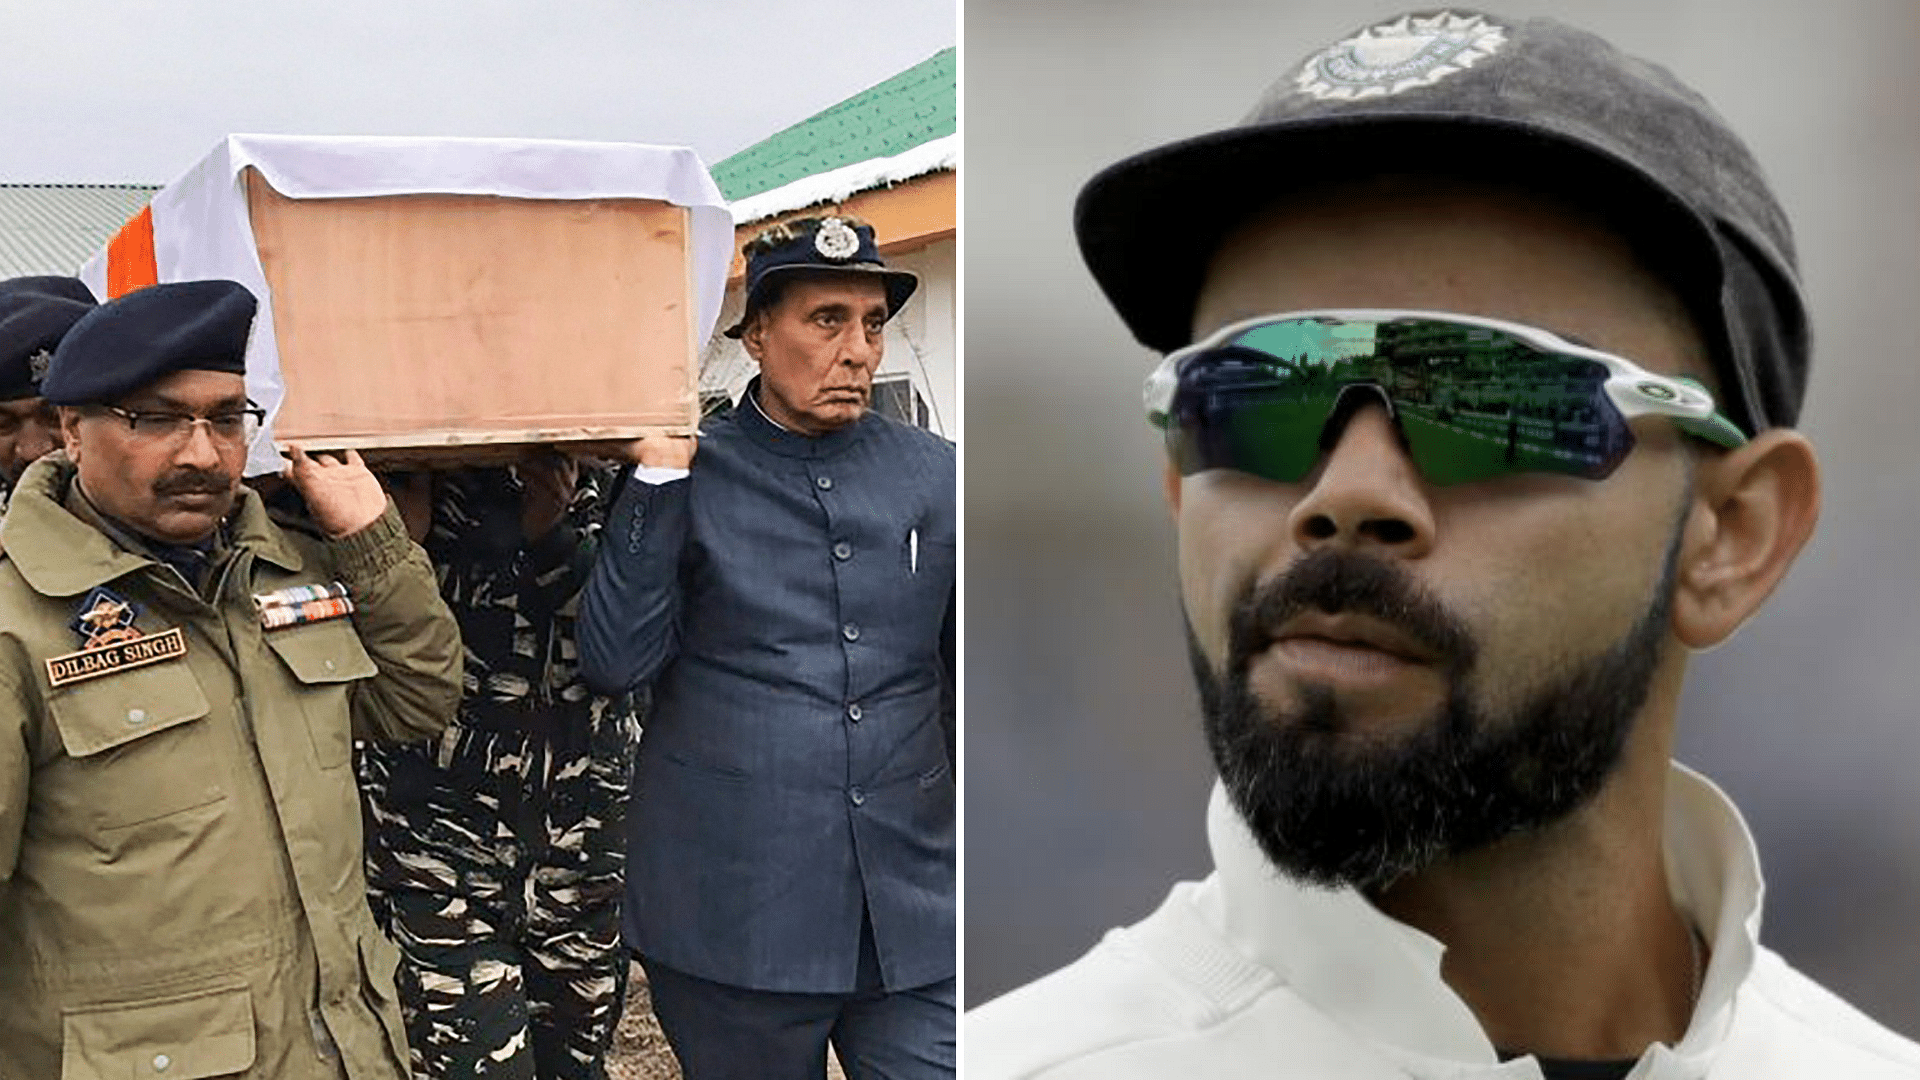 A DDCA felicitation ceremony in honour of Kohli, Sehwag and Gambhir has been cancelled in light of the terror attack which martyred 40 CRPF jawans in Pulwama.